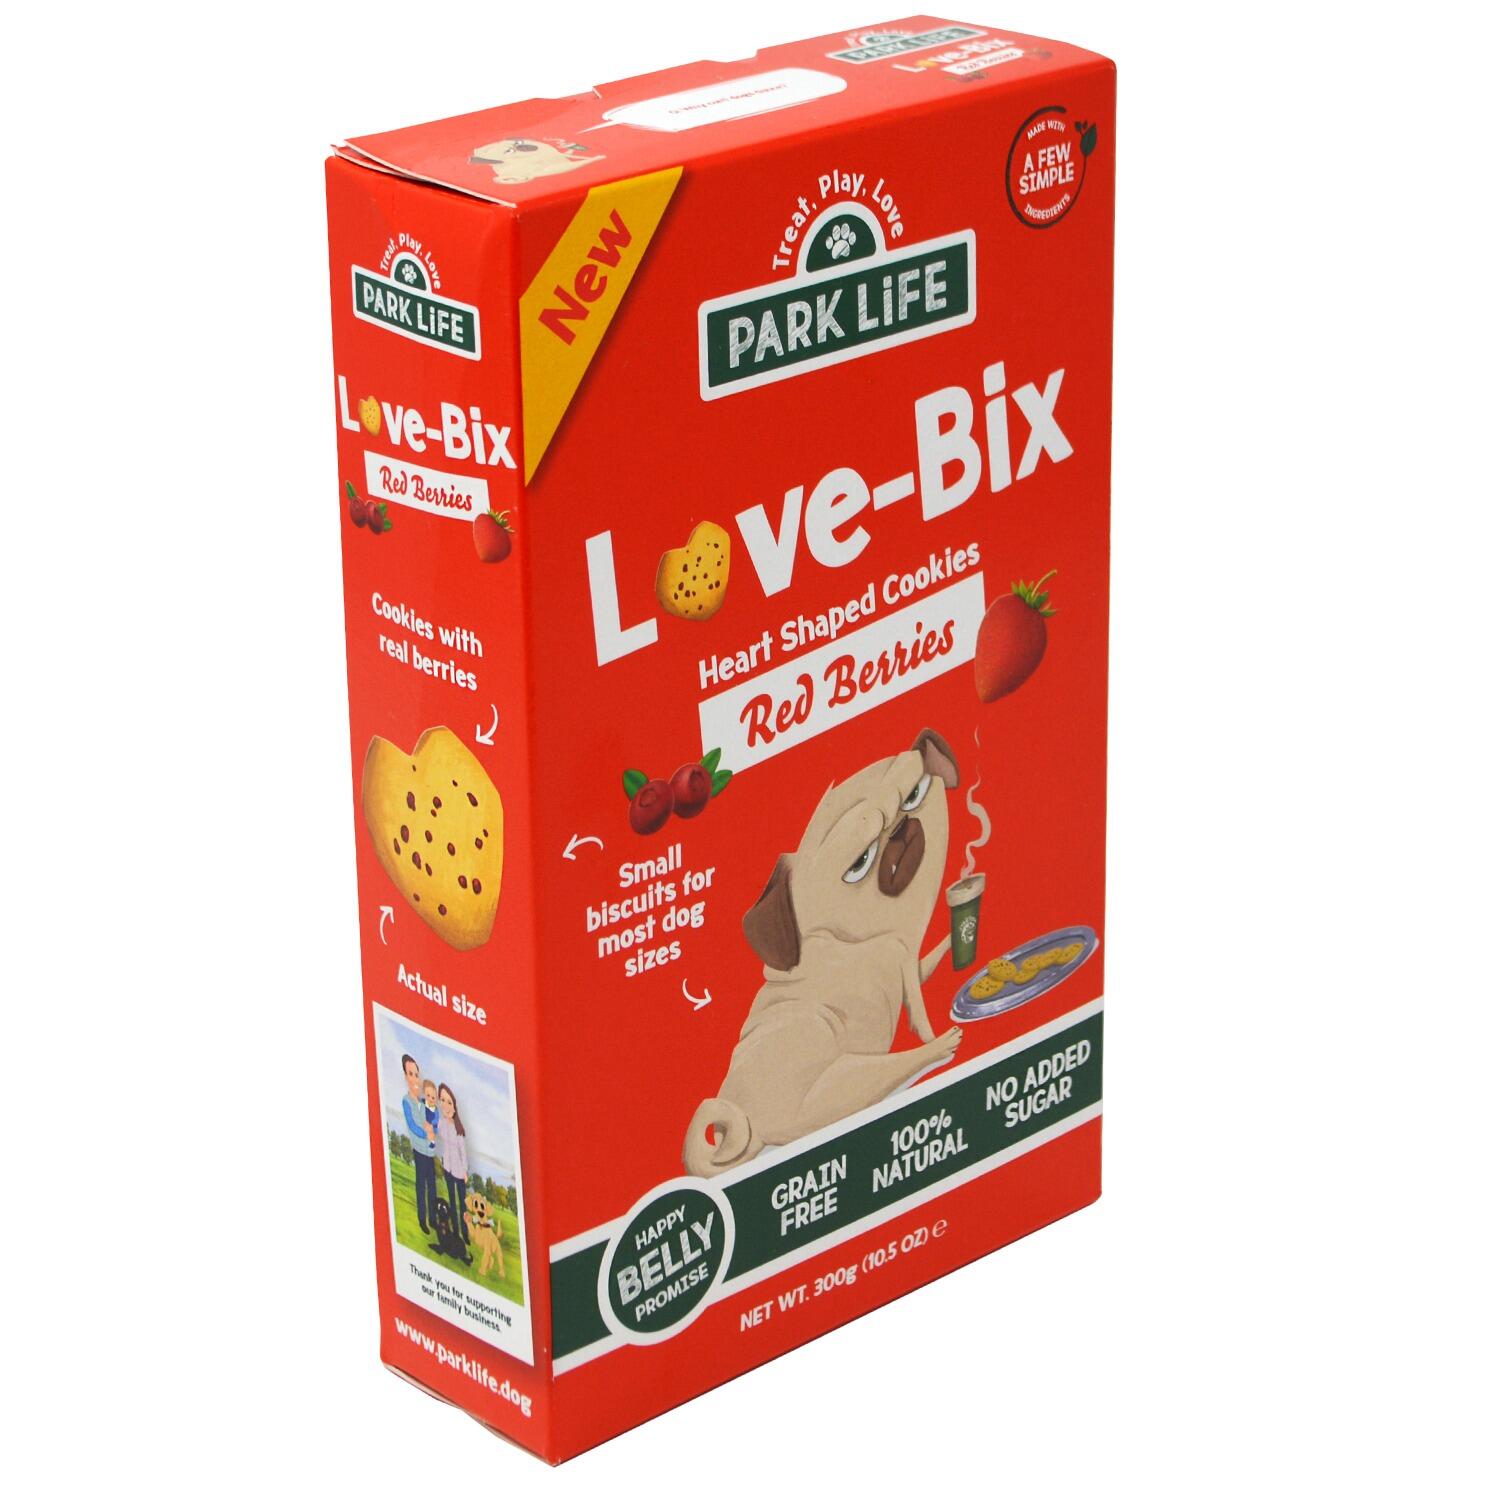 angled view of a box of grain free plant based dog biscuits from park life